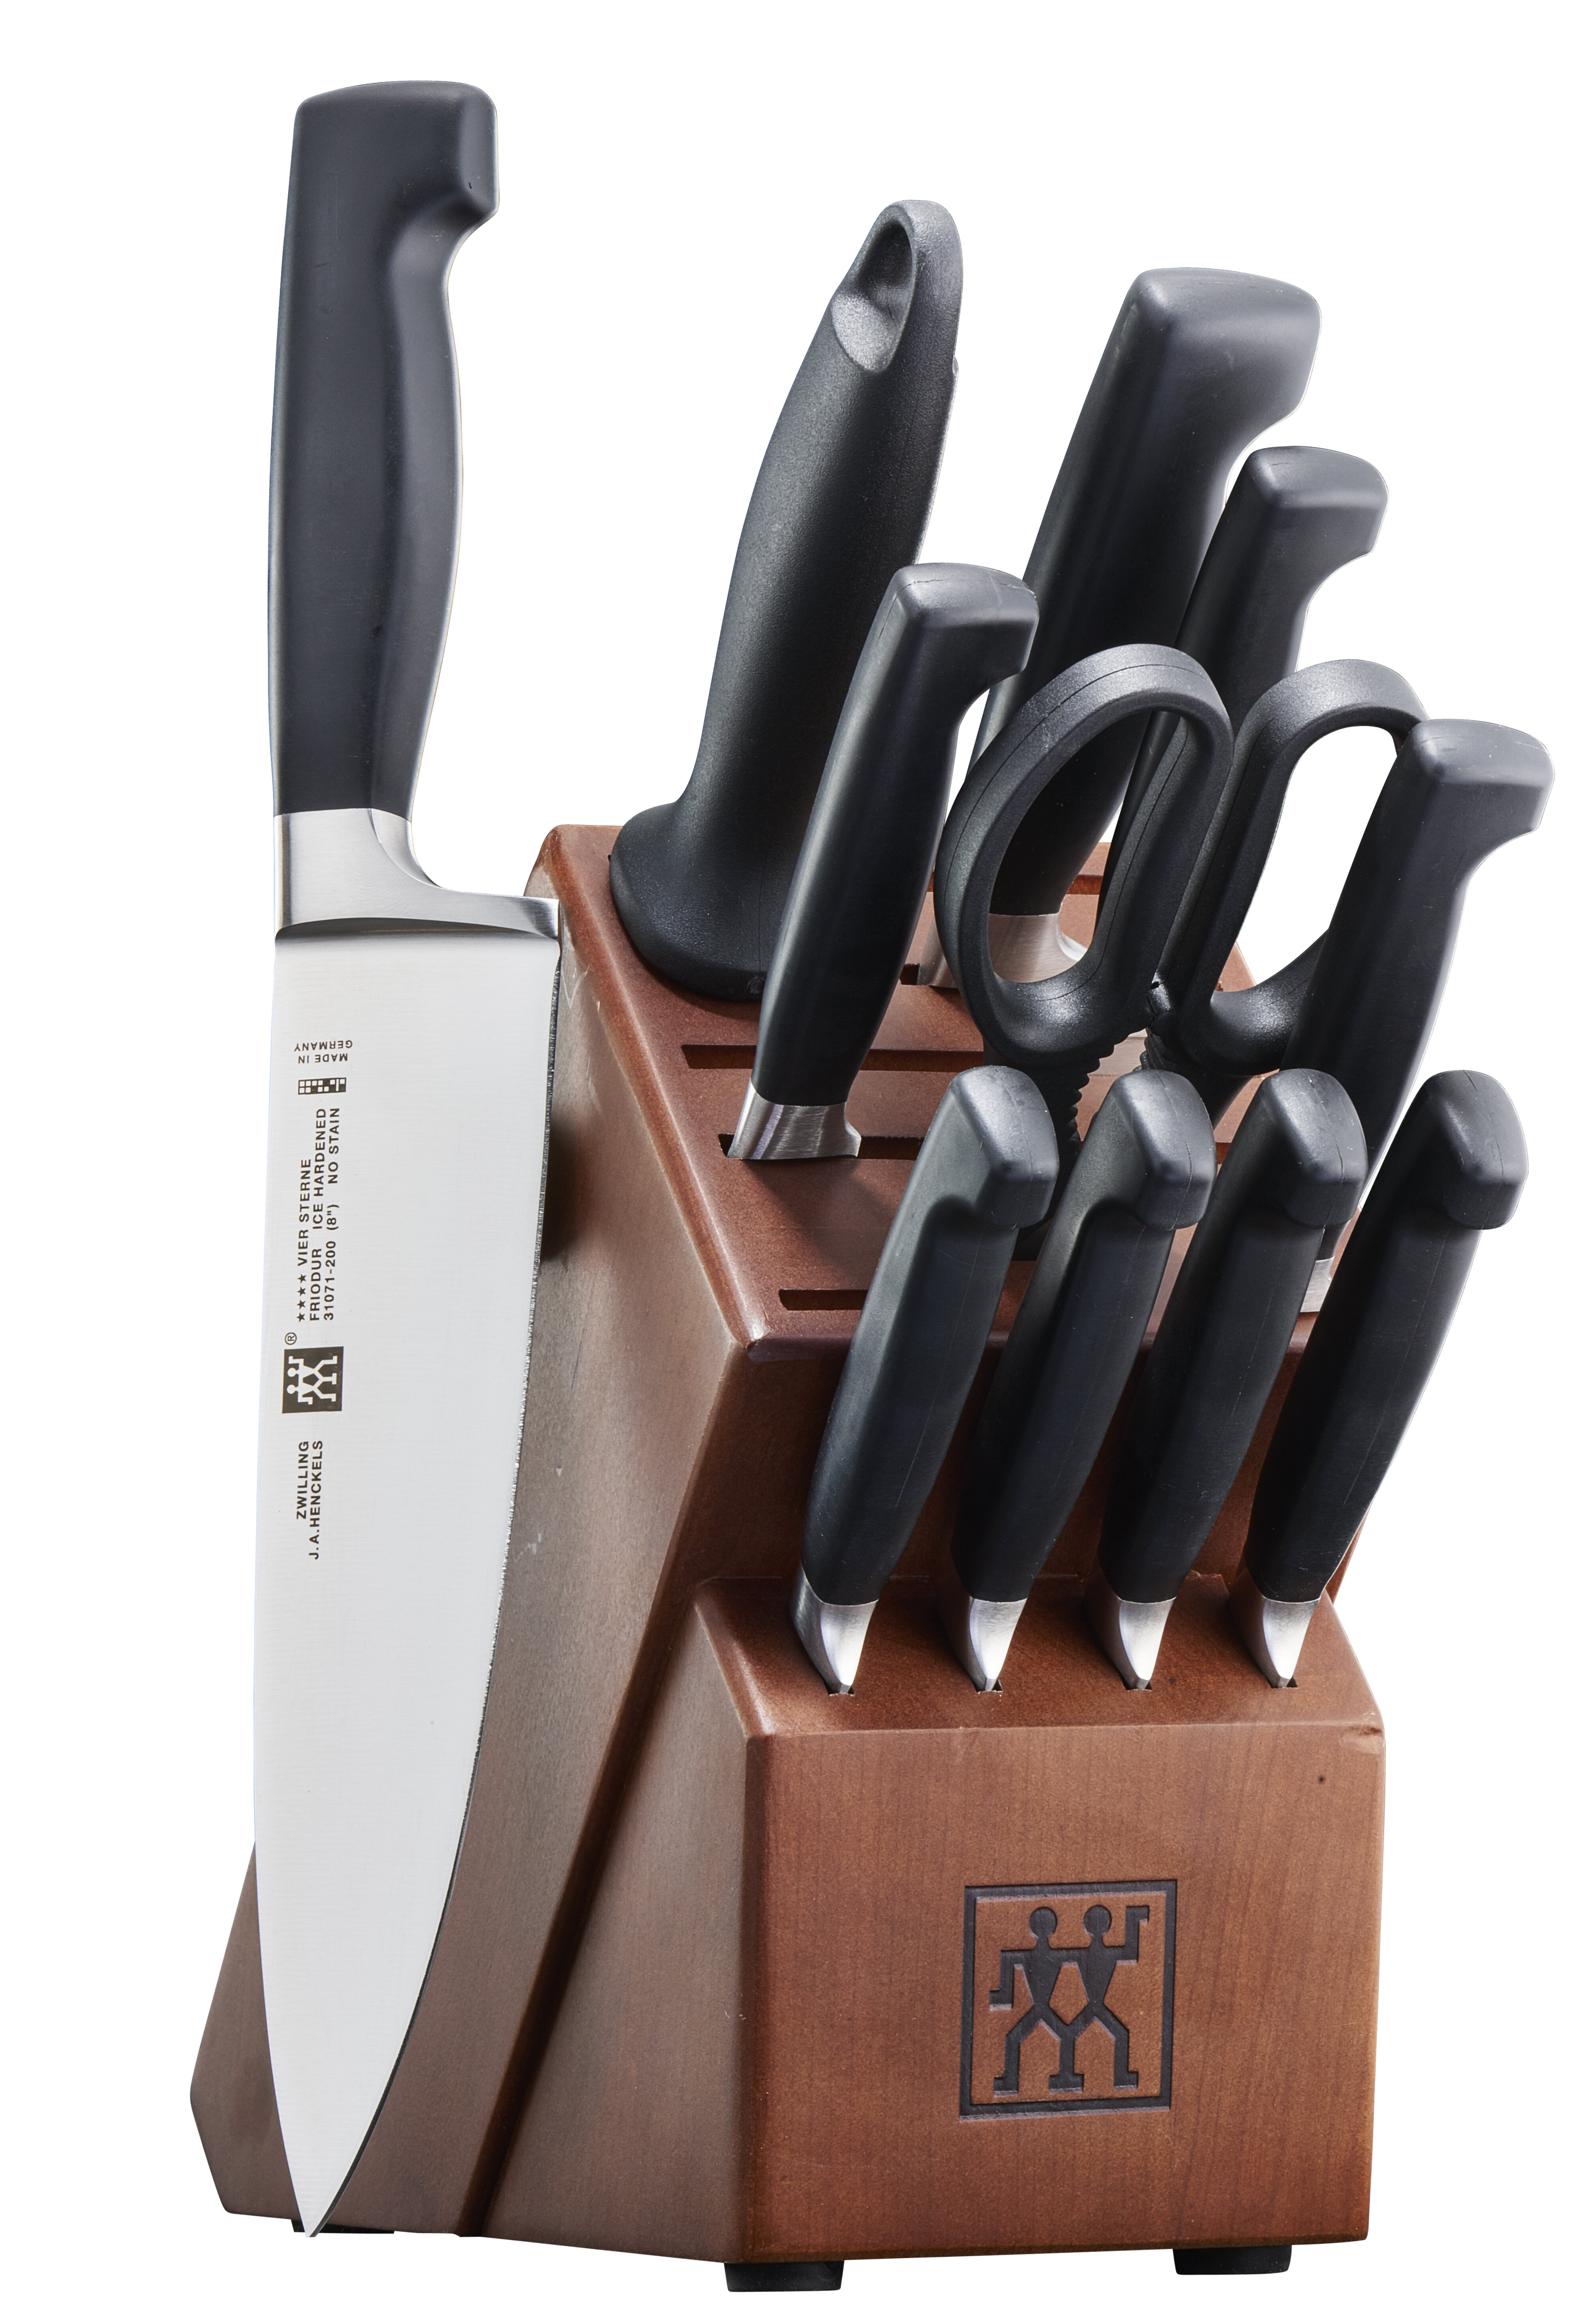 Zwilling Four Star Eco Self-Sharpening Knife Block, Set of 7